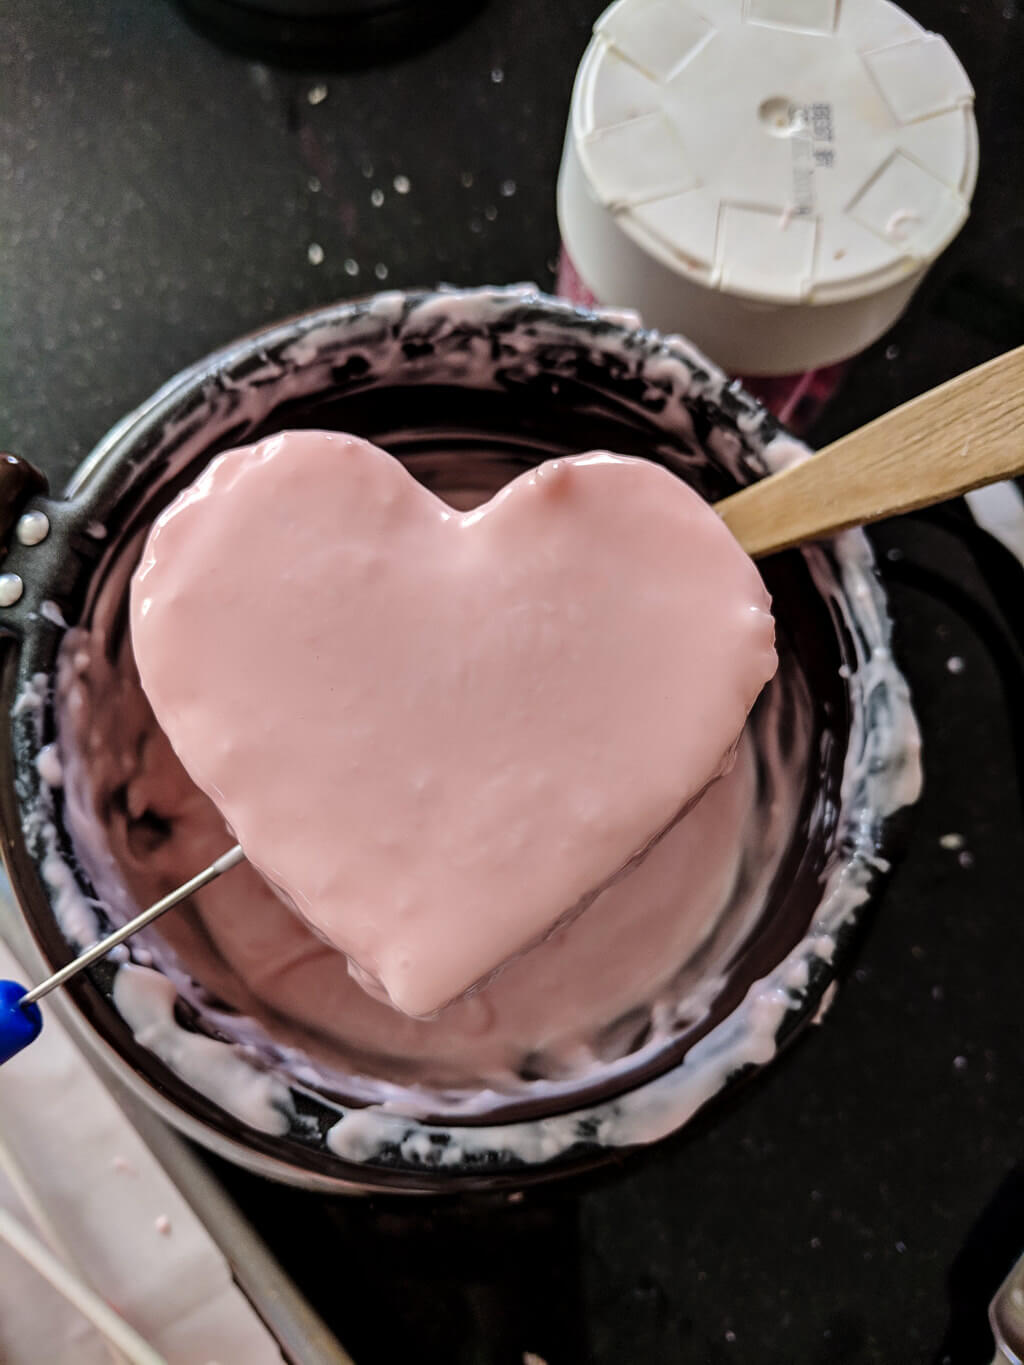 Heart cake coated in melted chocolate